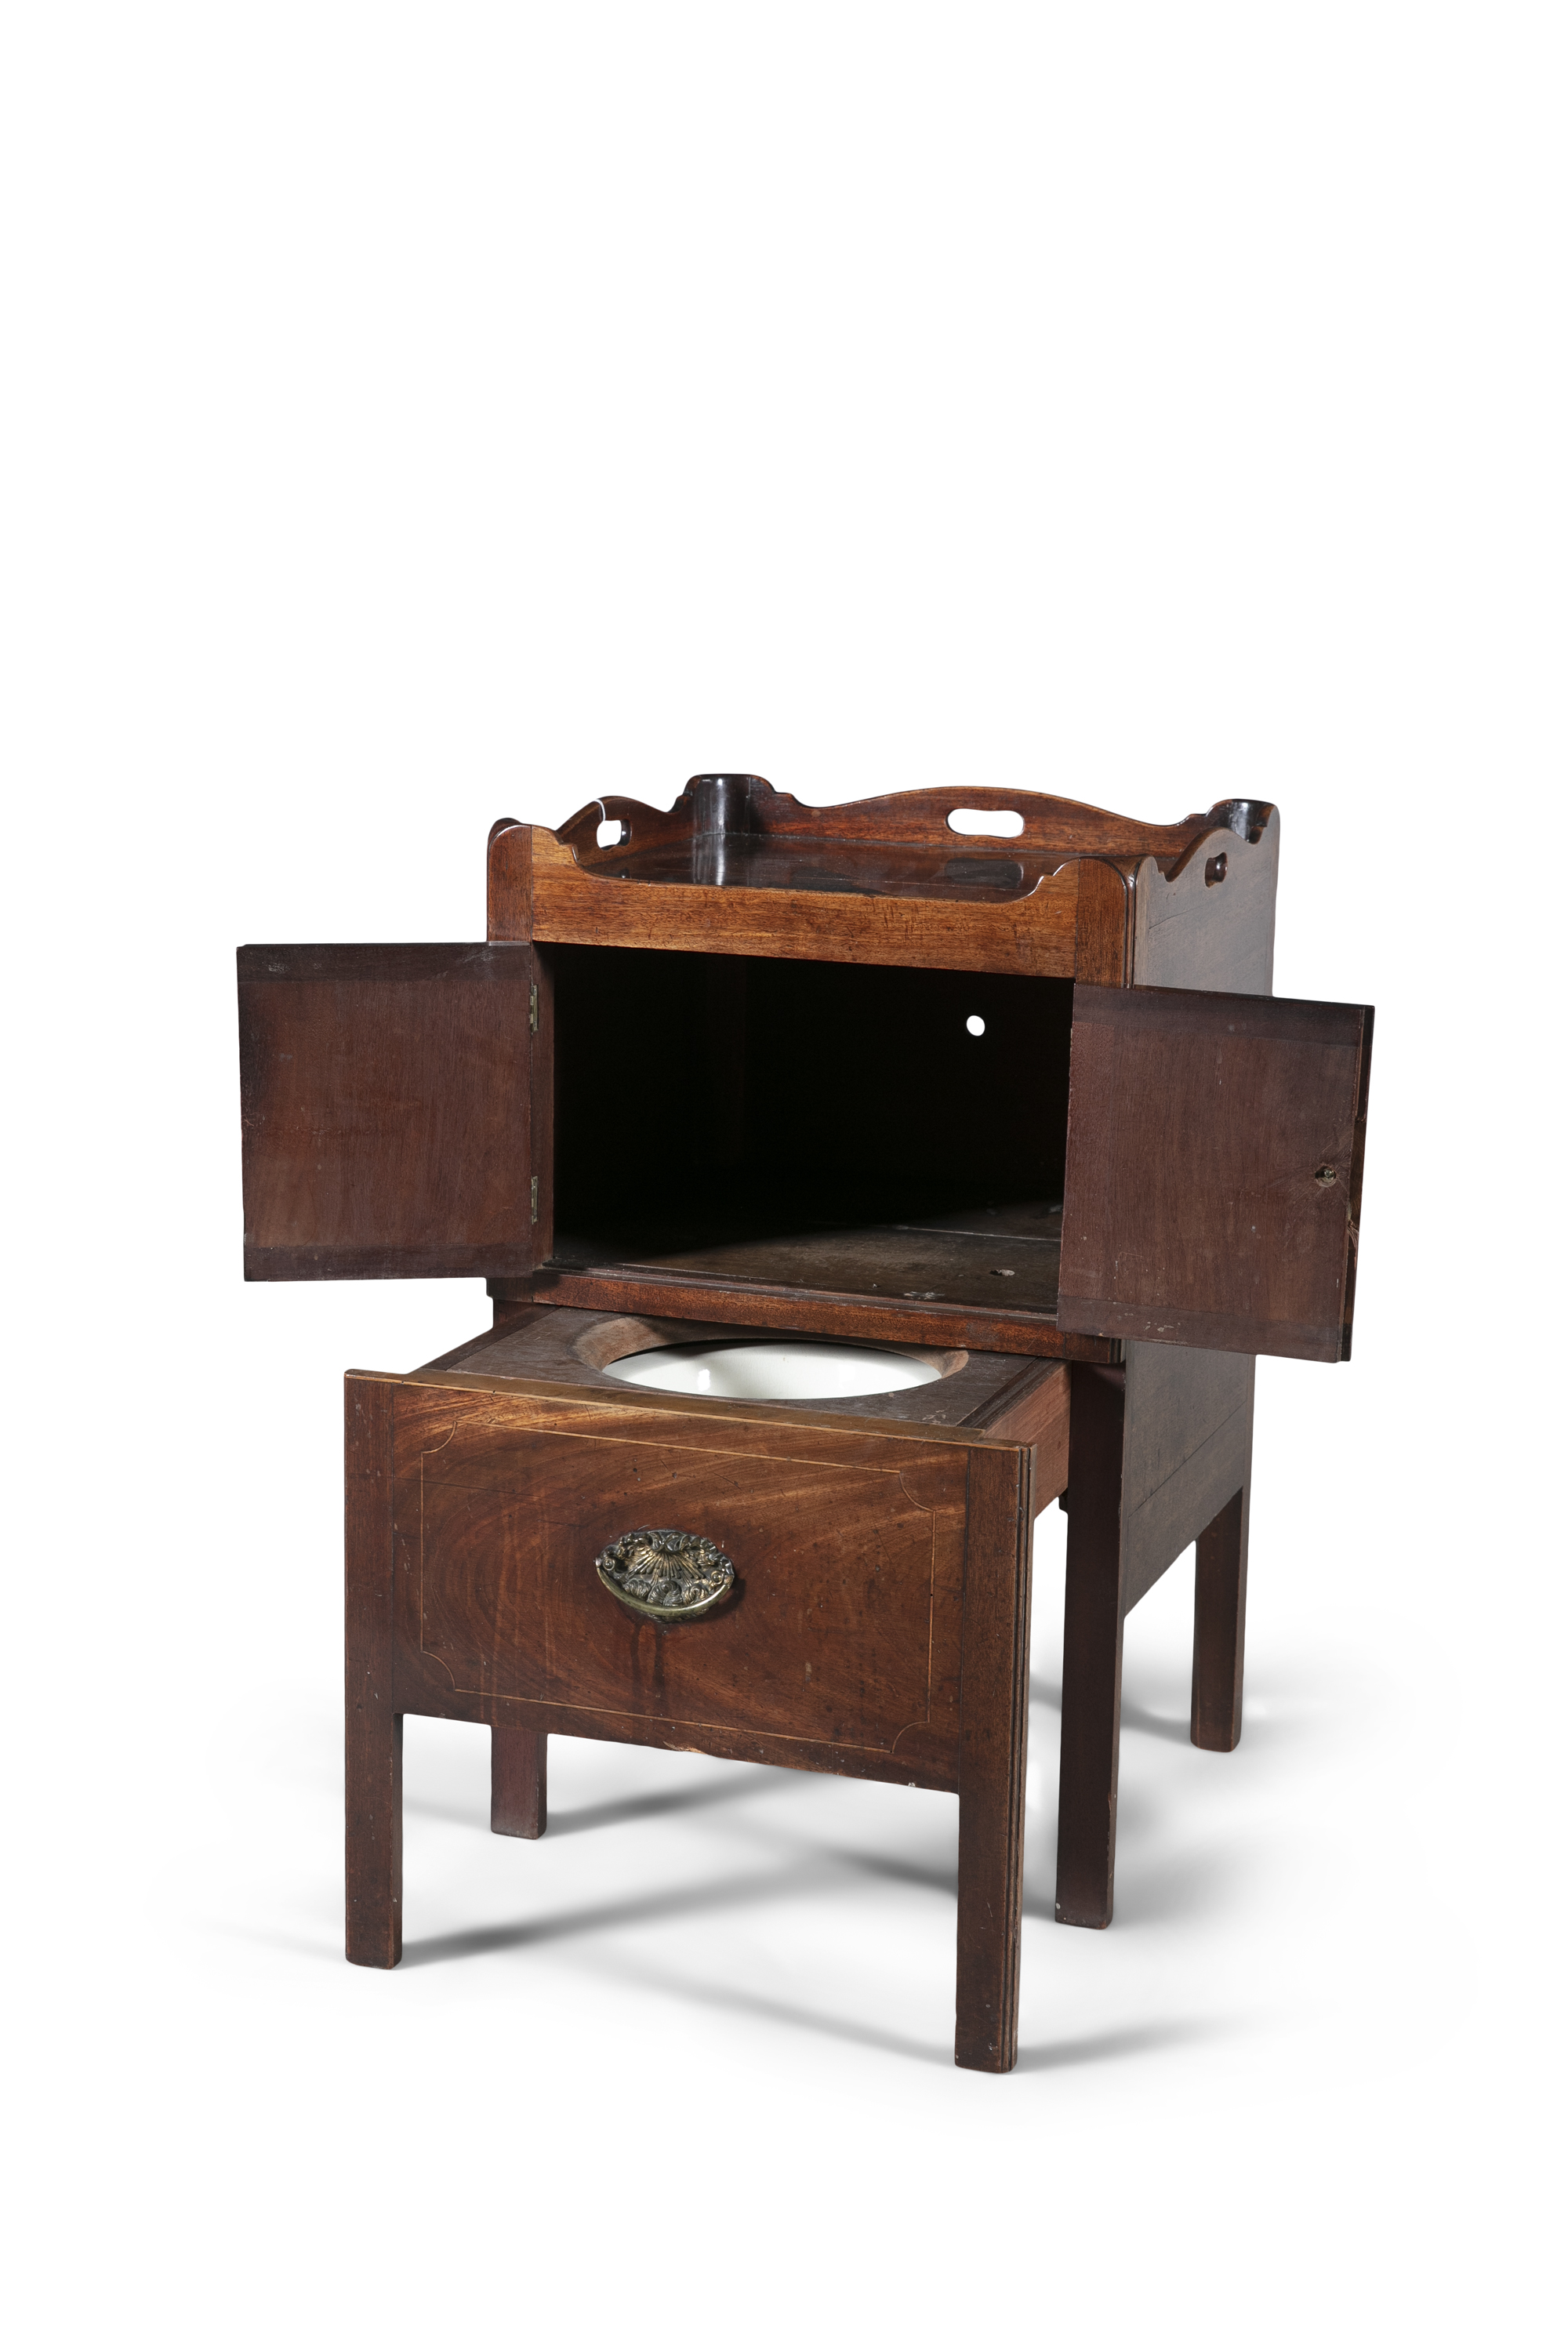 A GEORGE III MAHOGANY TRAY TOP COMMODE, with twin panel doors above a pull-out pot cupboard, on - Image 2 of 2